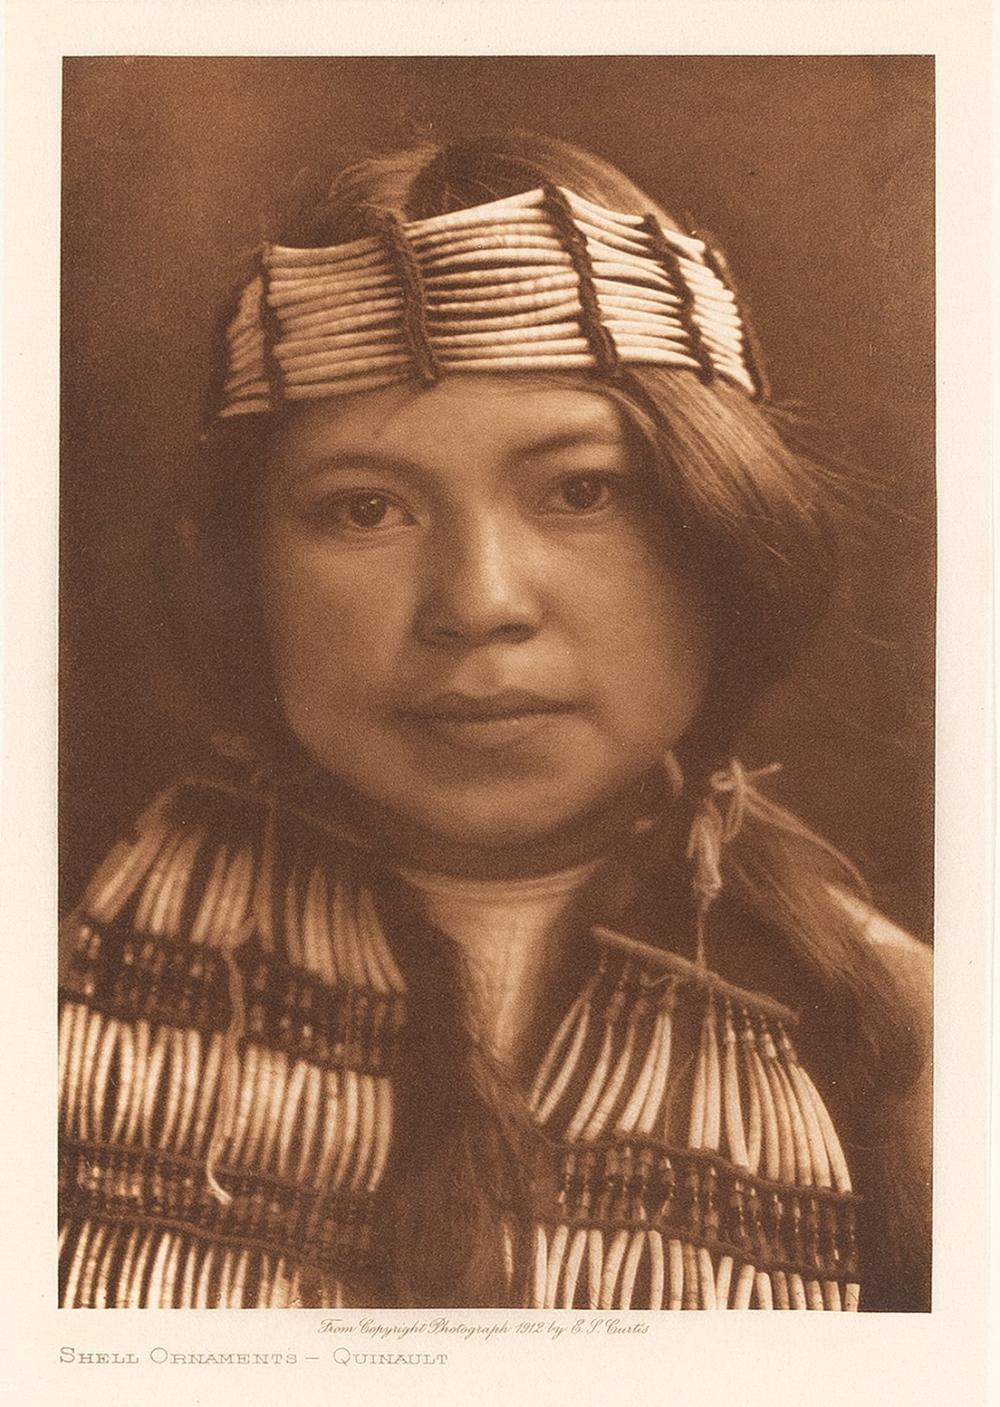 EDWARD S. CURTIS, SHELL ORNAMENTS